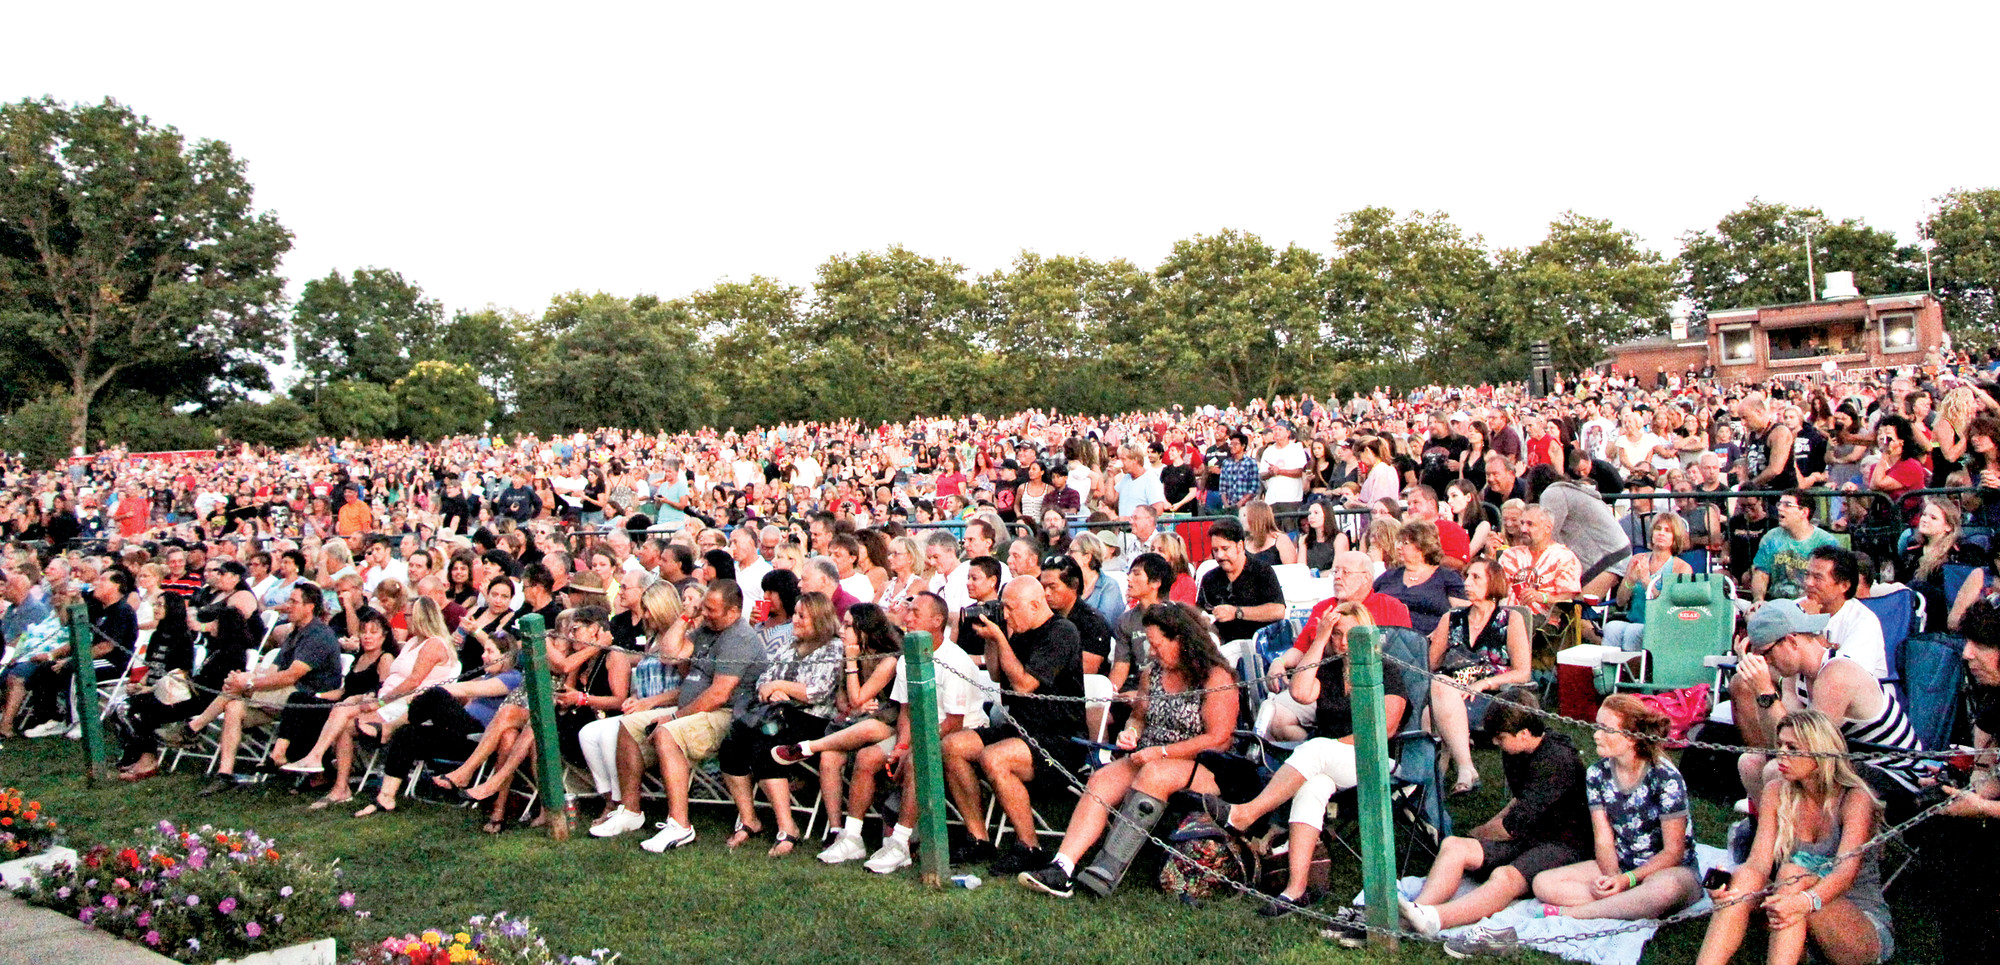 Eisenhower Park was filled to capacity for a great summer night concert.